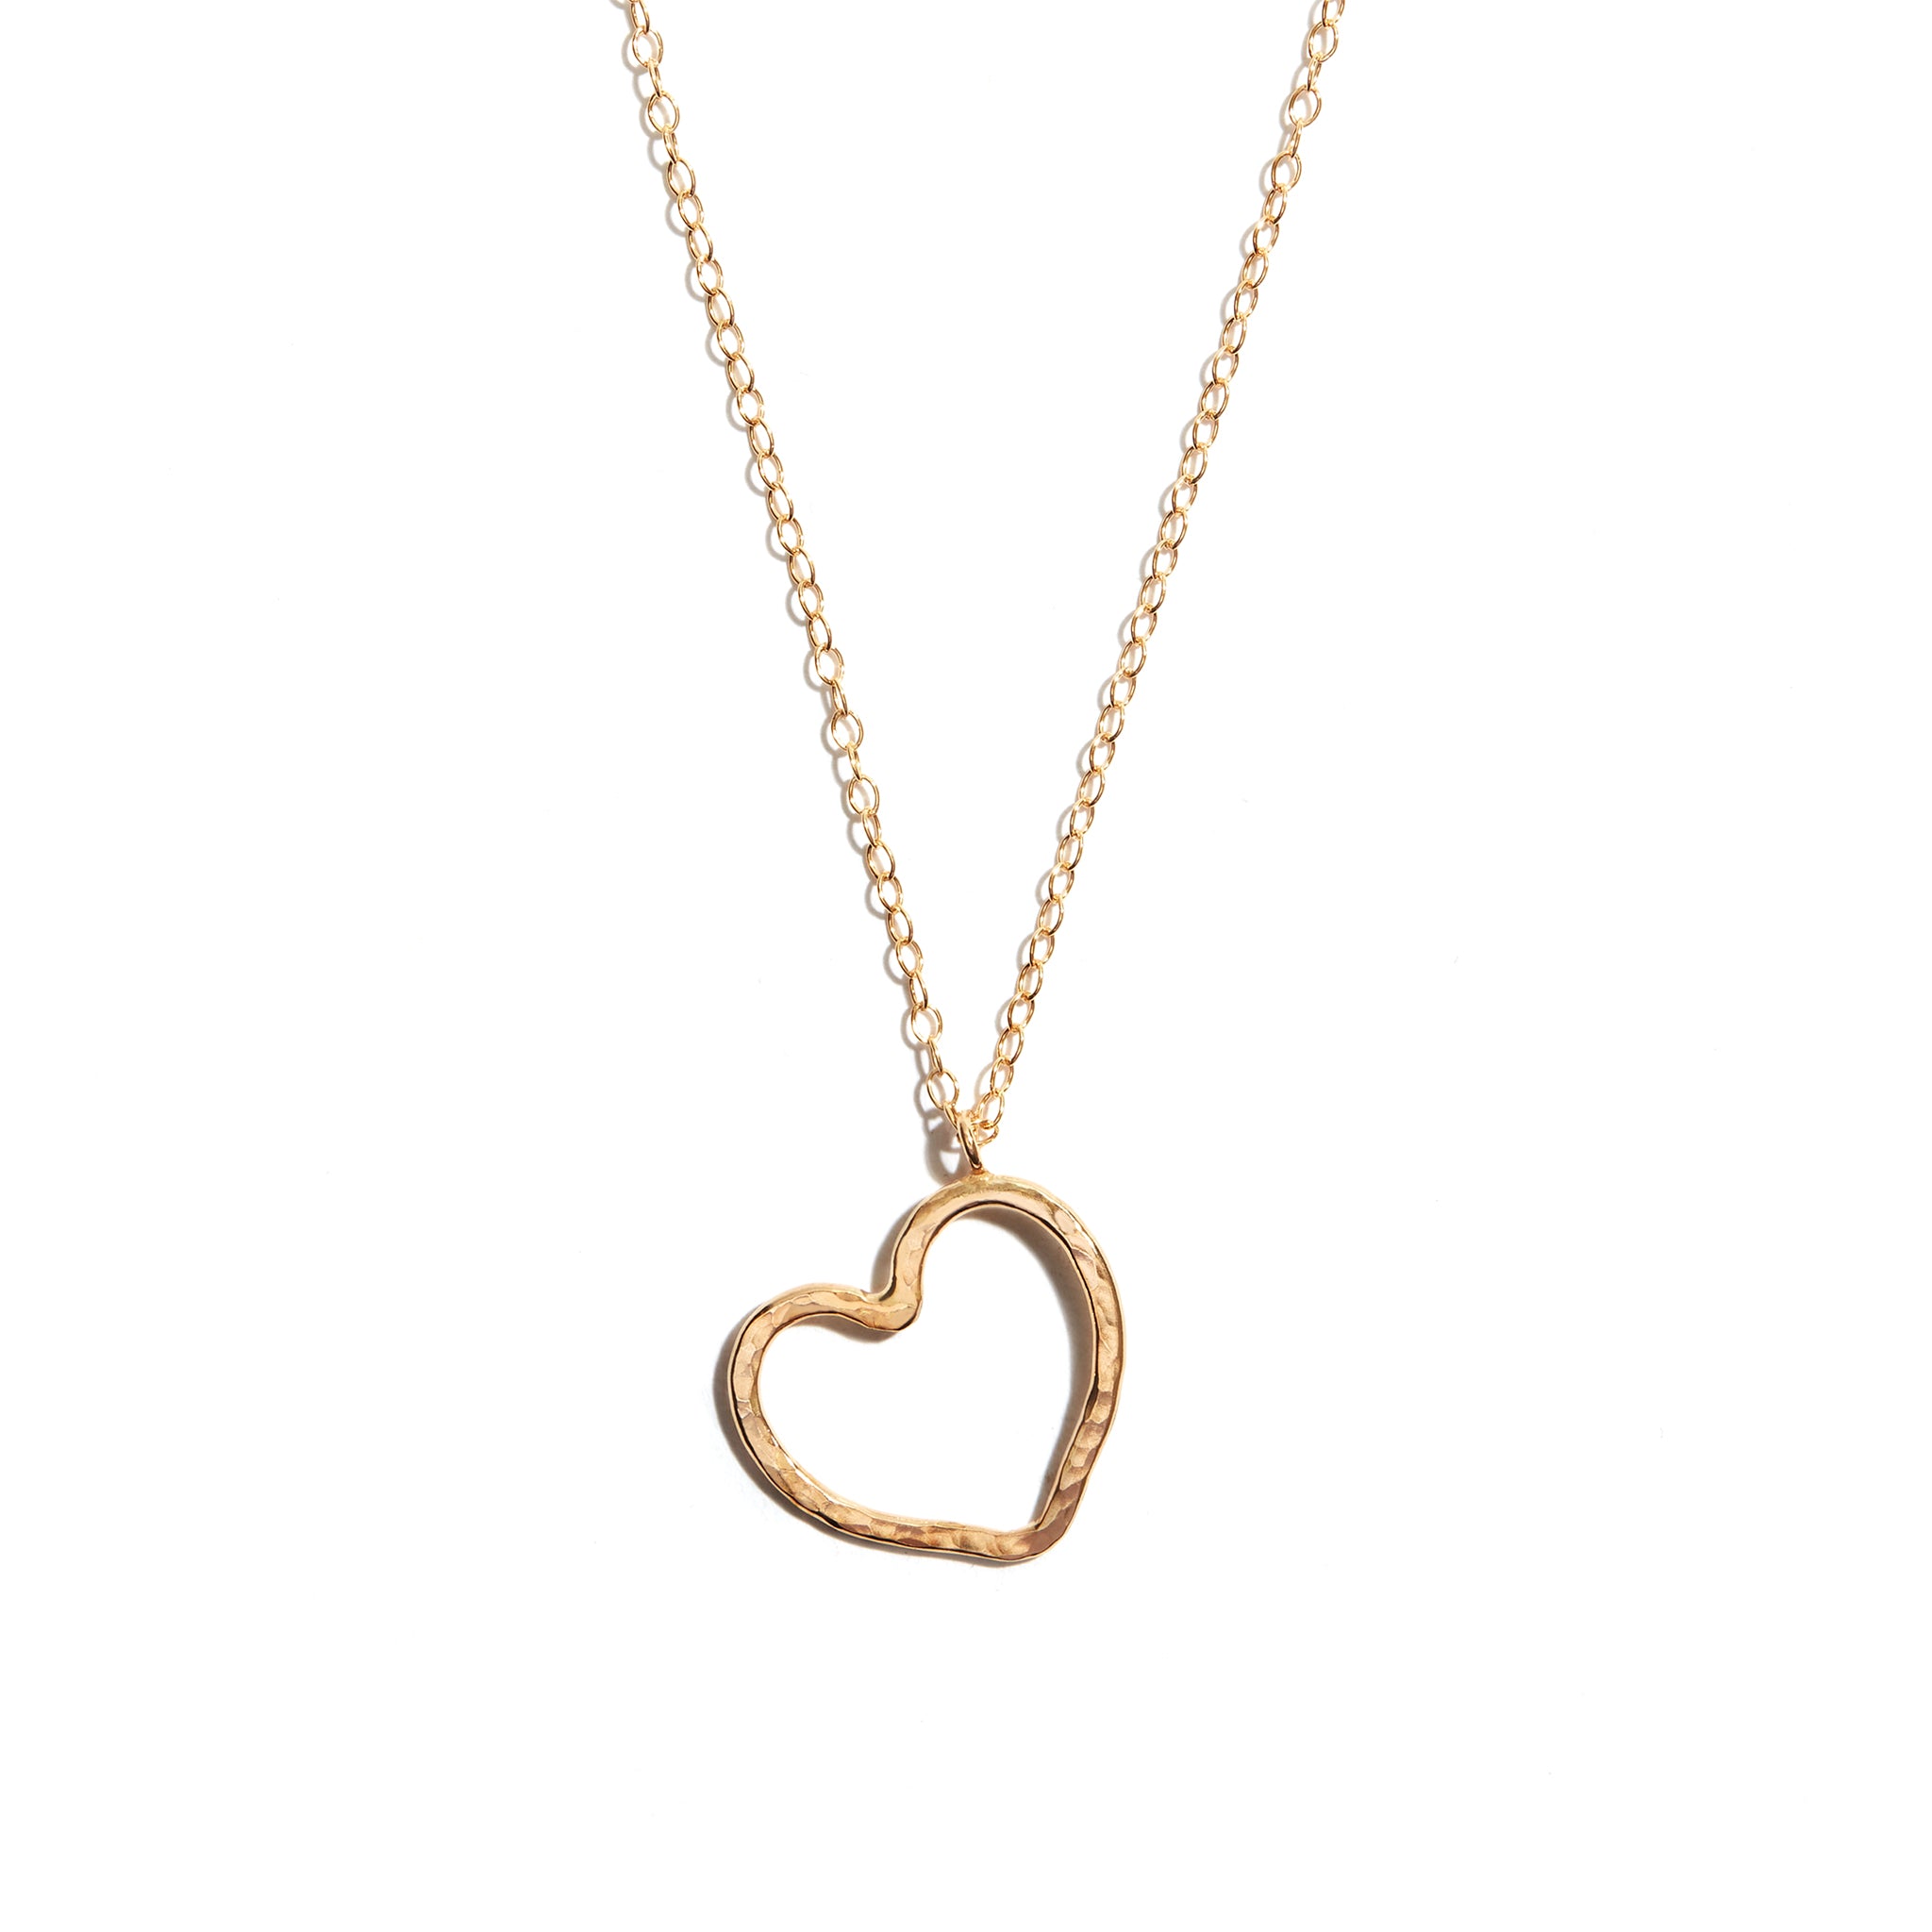 Beautiful Gold Open Heart Necklace crafted from 14 carat gold-fill, symbolizing love and elegance, perfect for any occasion.